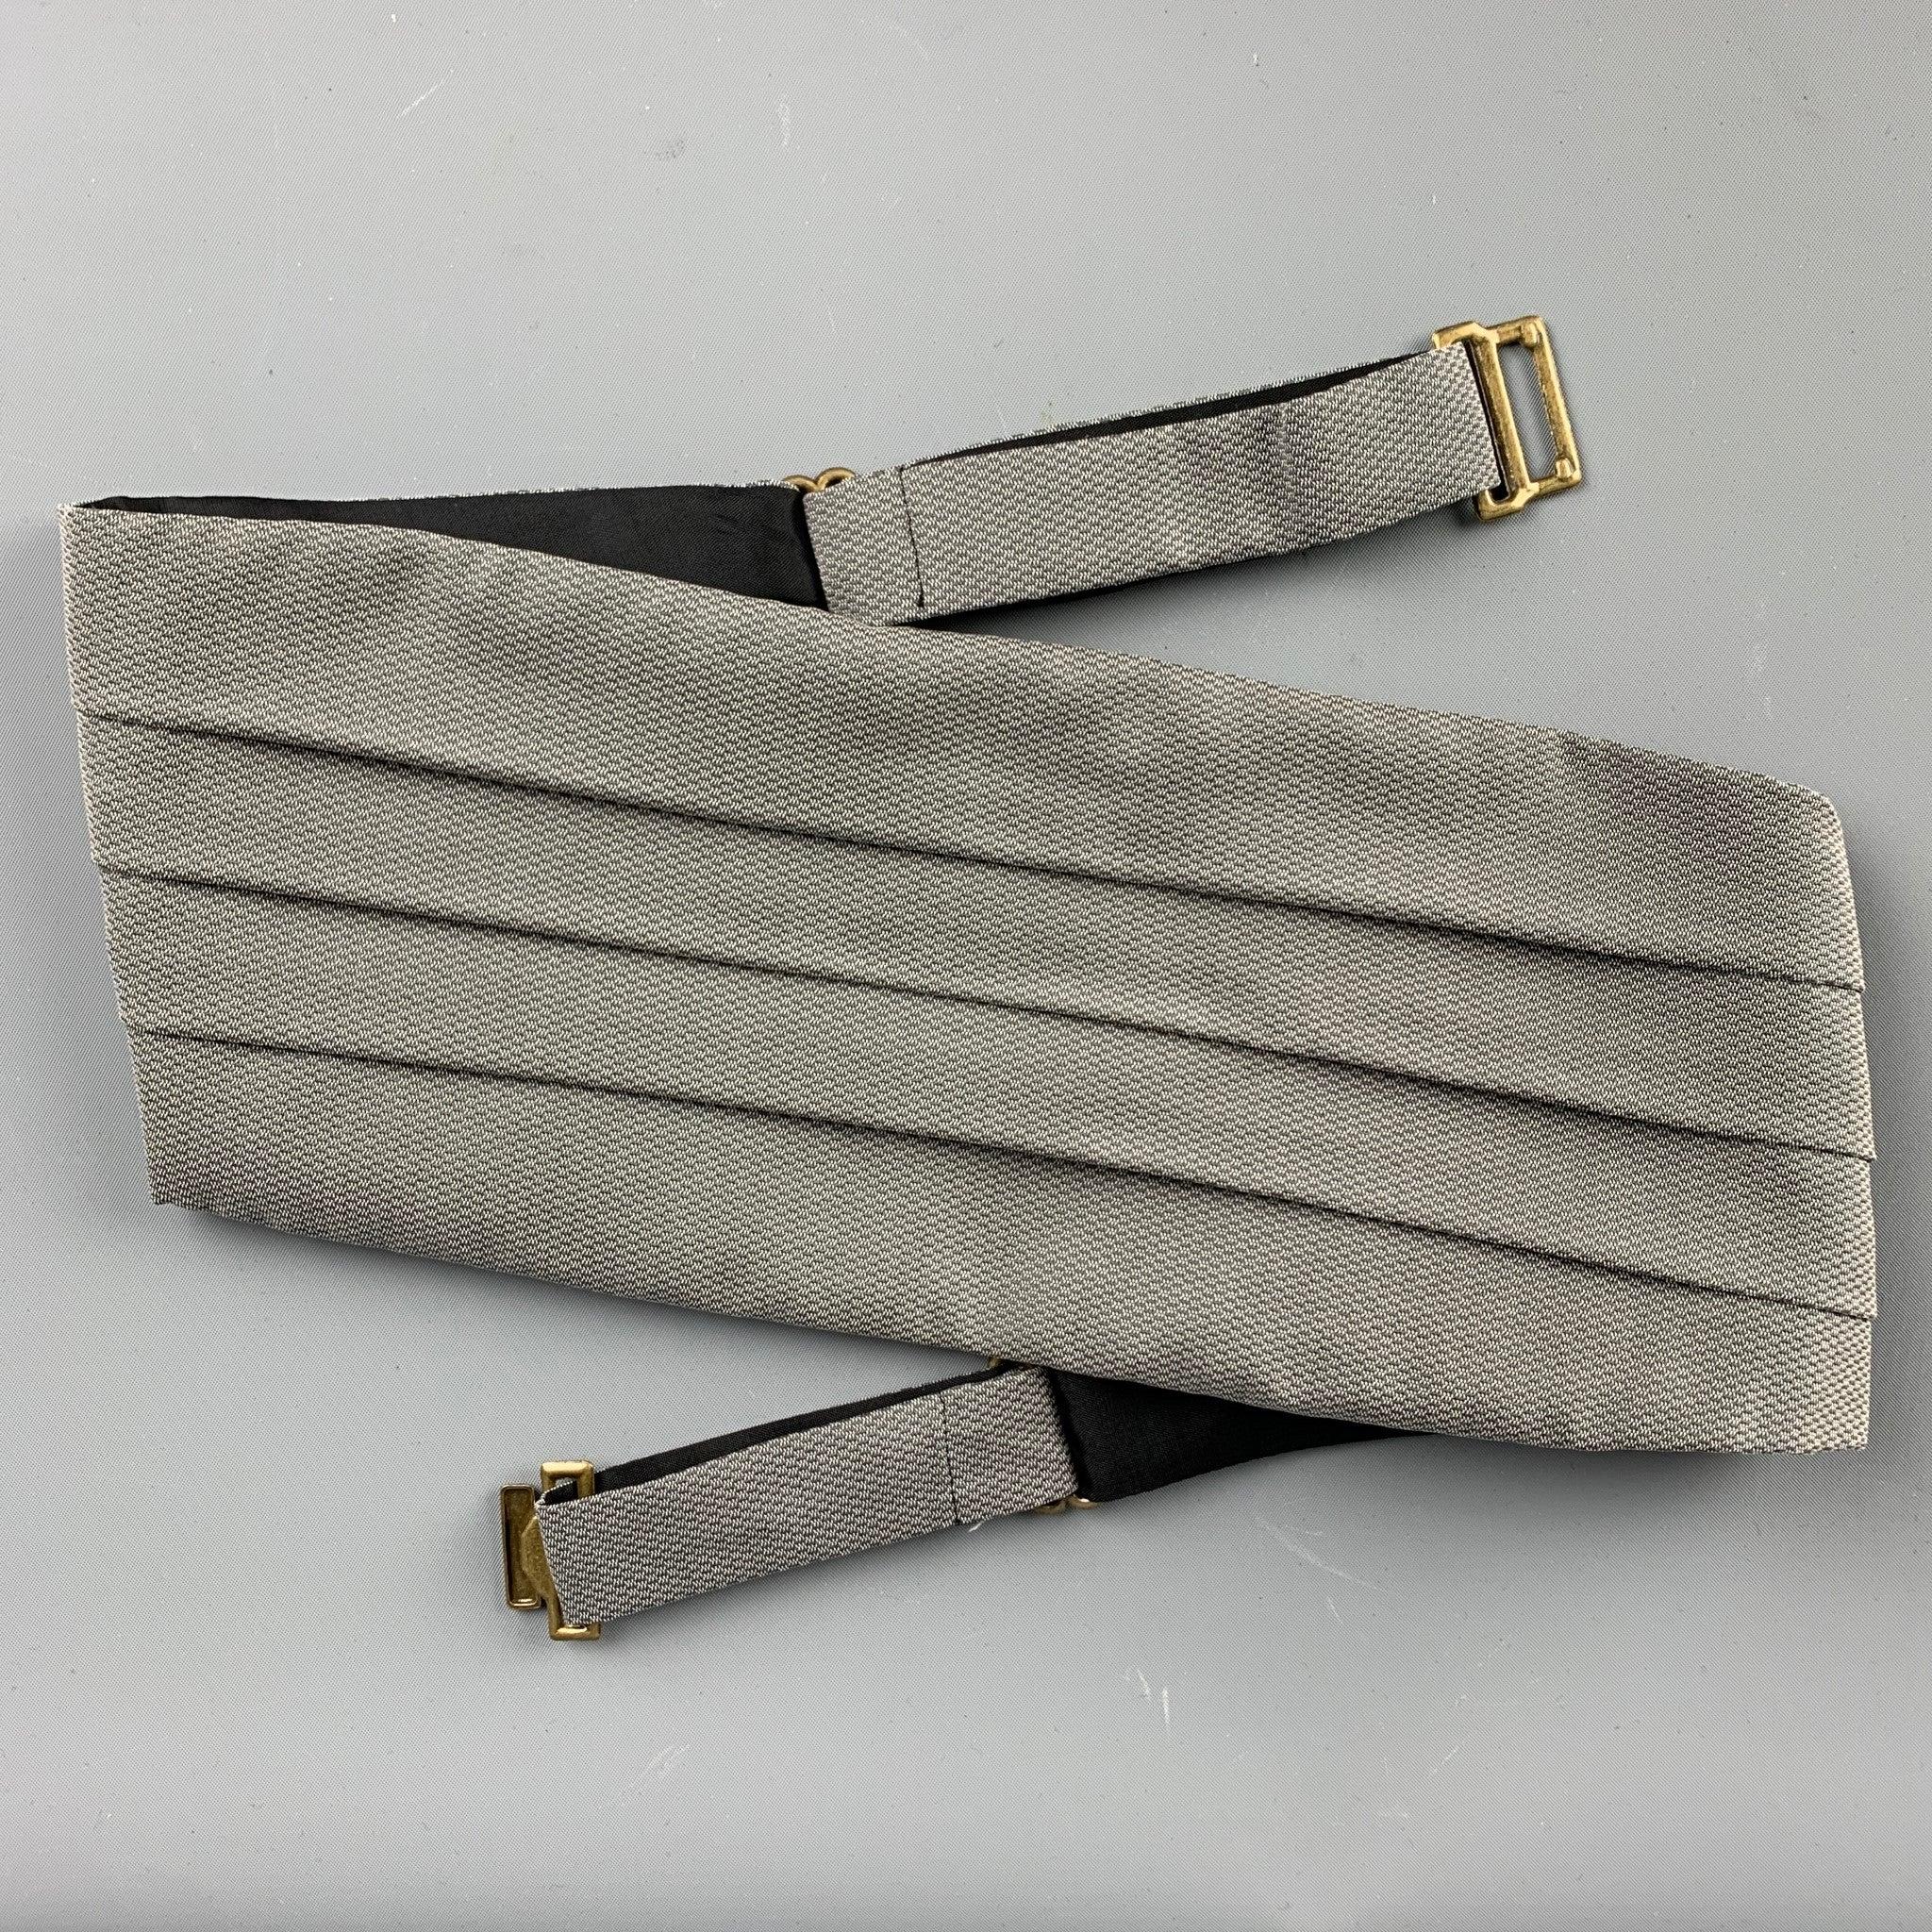 GIORGIO ARMANI
cummerbund set in a grey blue silk fabric featuring a nailhead pattern, and a matching pre-tied bow tie. Comes with box. Made in USA. Very Good Pre-Owned Condition. 

Measurements: 
  - Cummerbund. Height: 5.5 inches Length: 36 inches